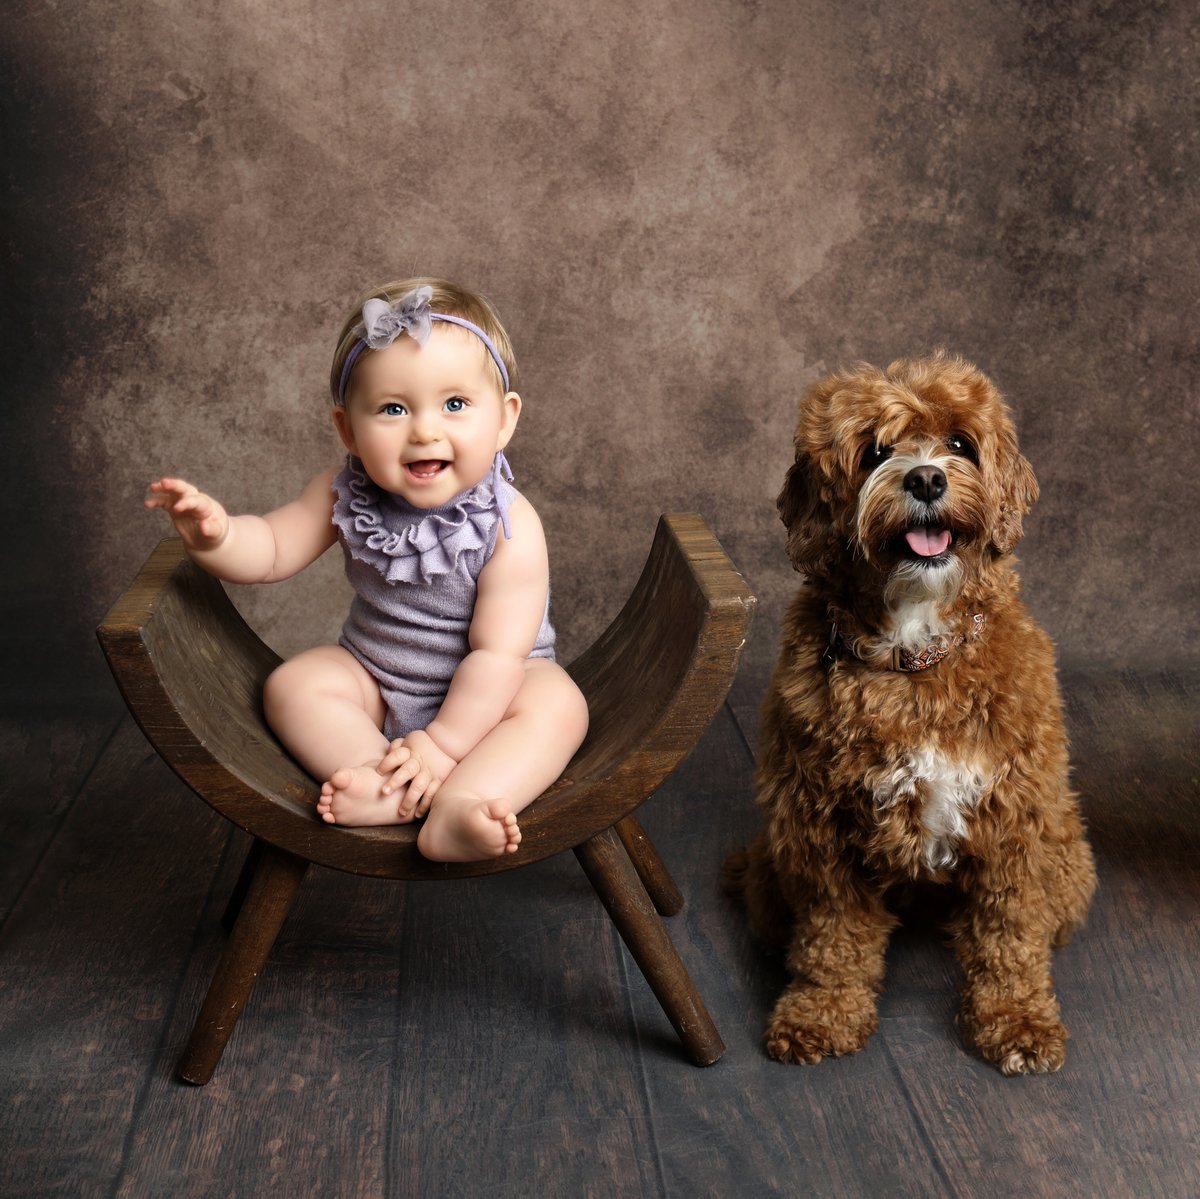 baby and dog sitting together during professional photoshoot